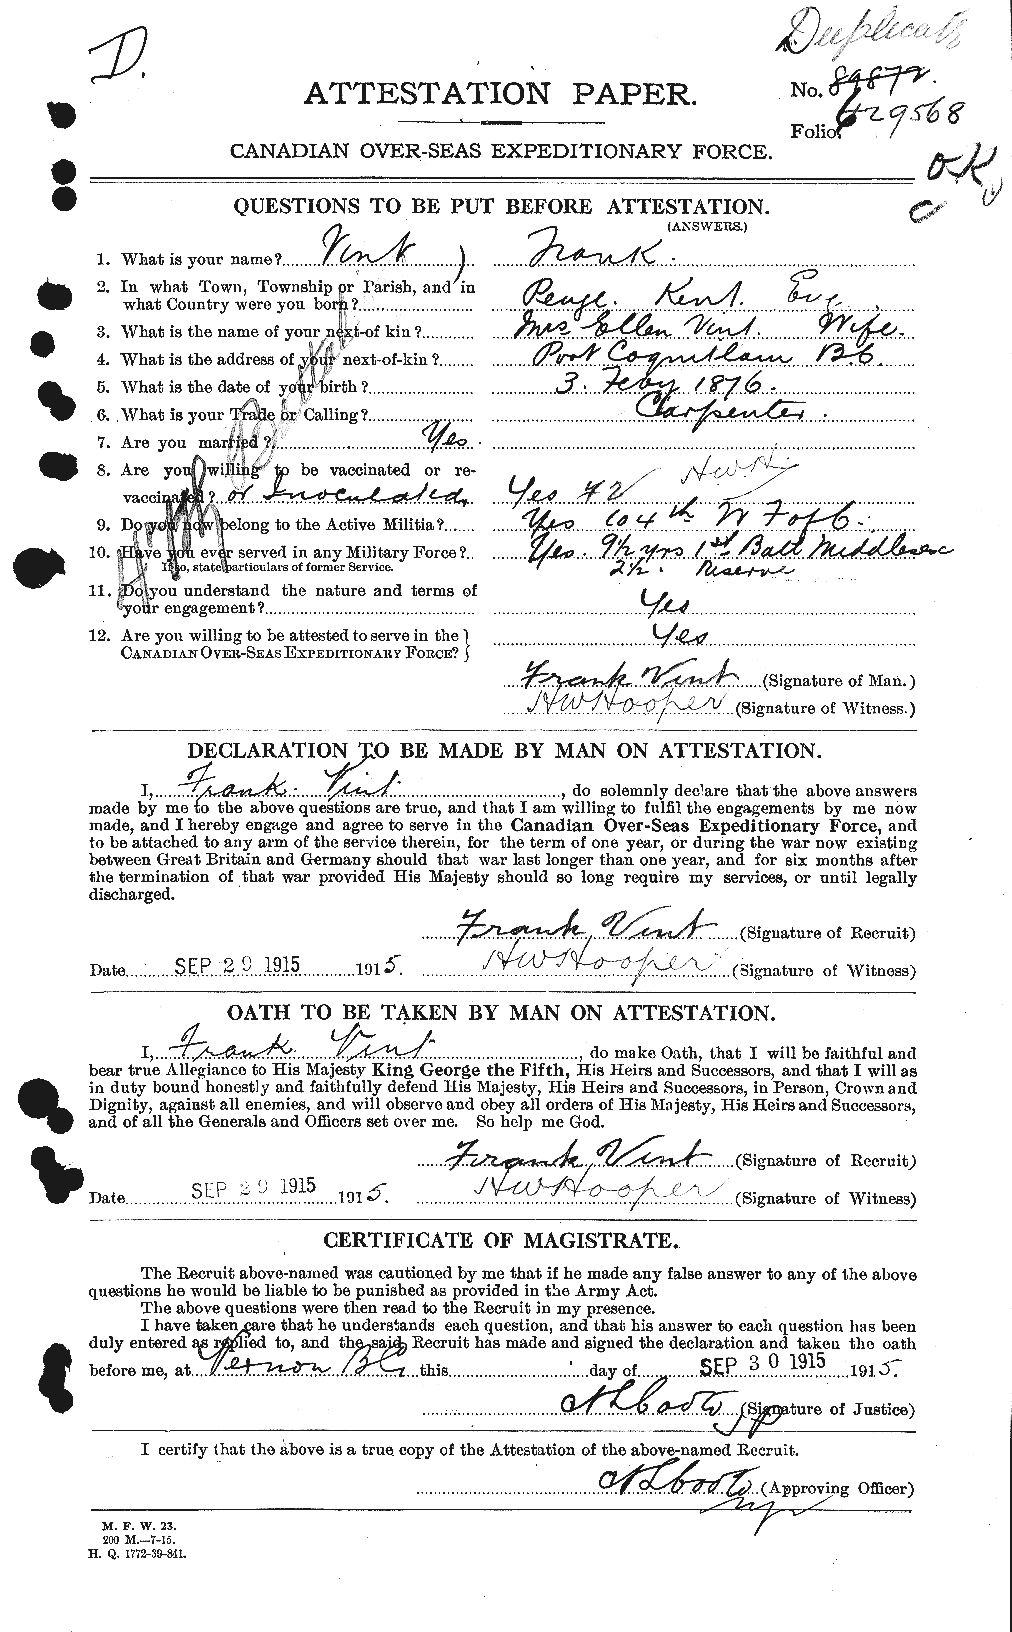 Personnel Records of the First World War - CEF 648681a